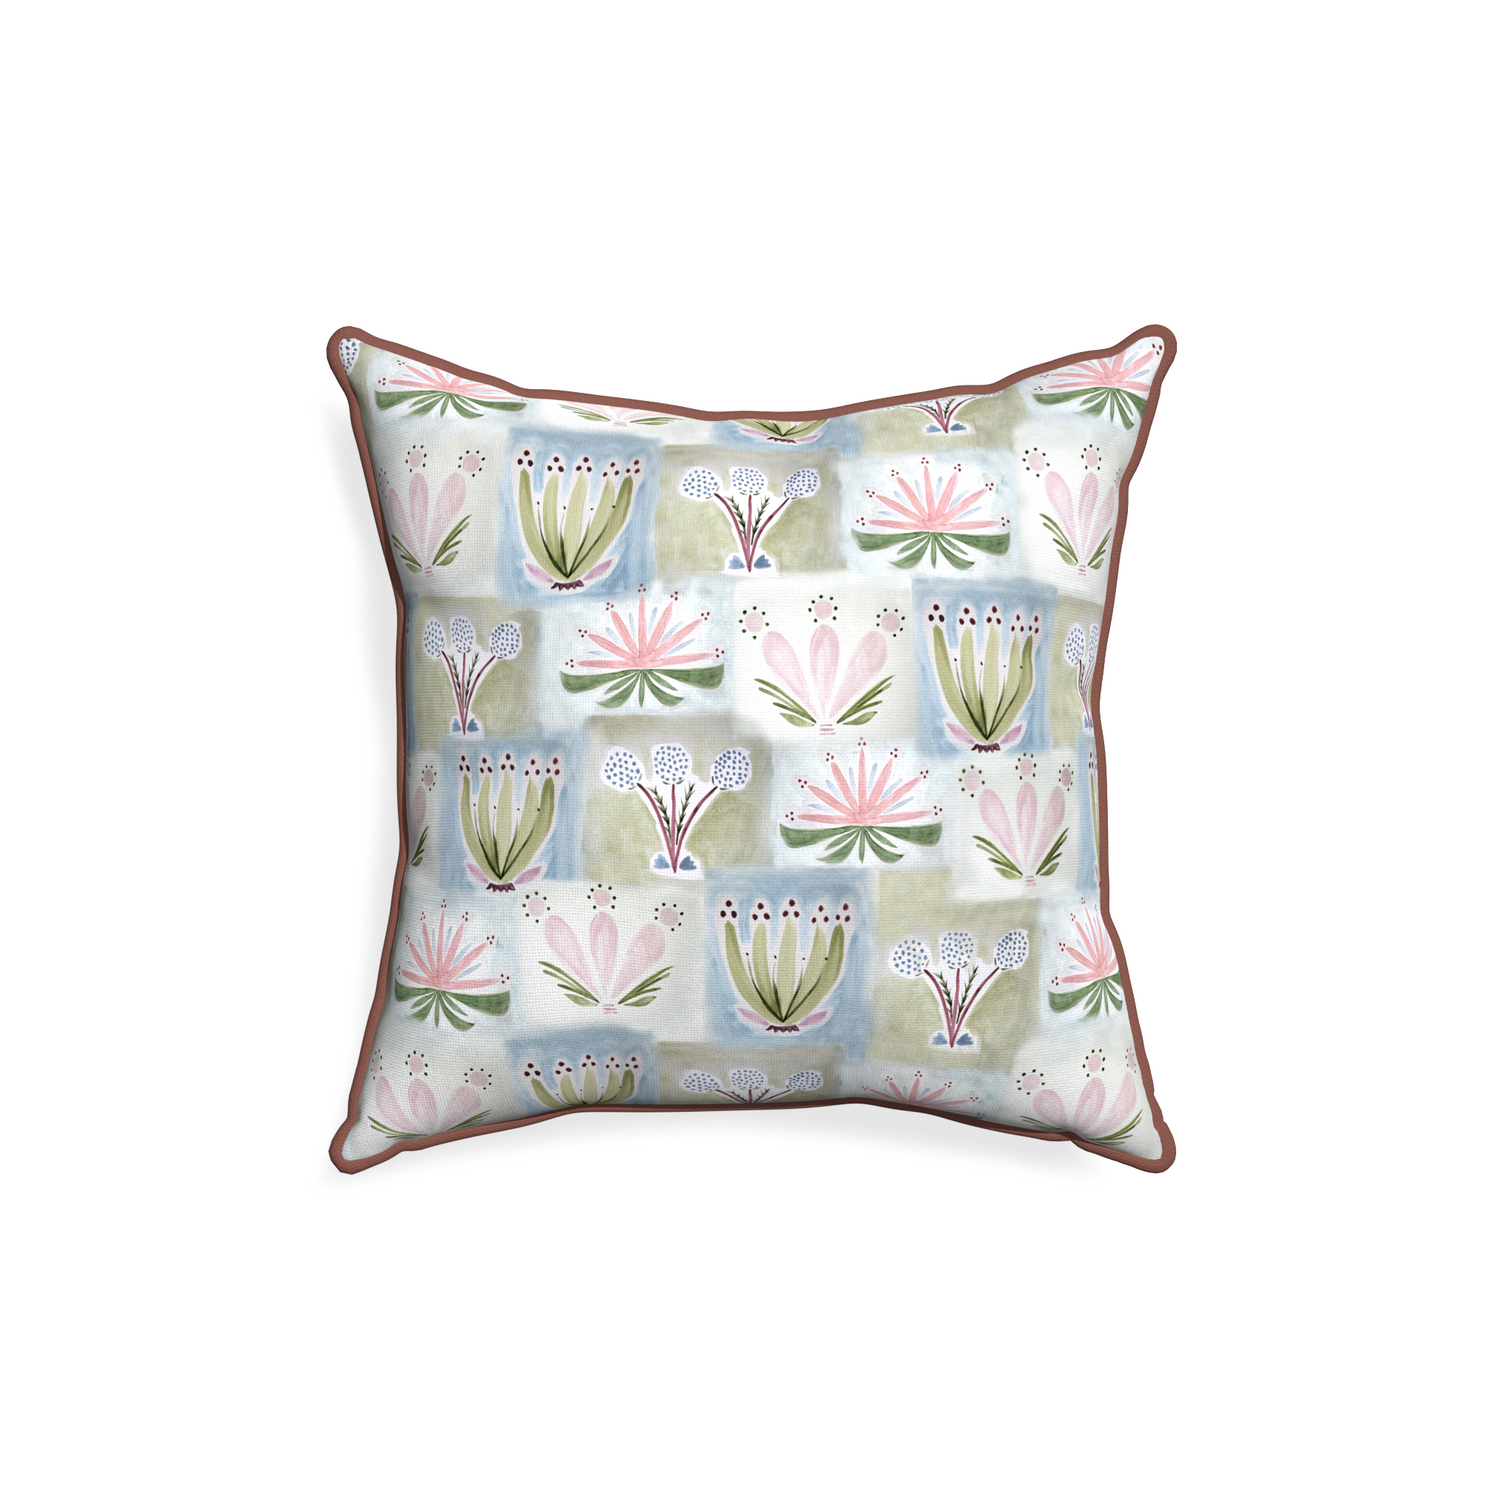 18-square harper custom hand-painted floralpillow with w piping on white background